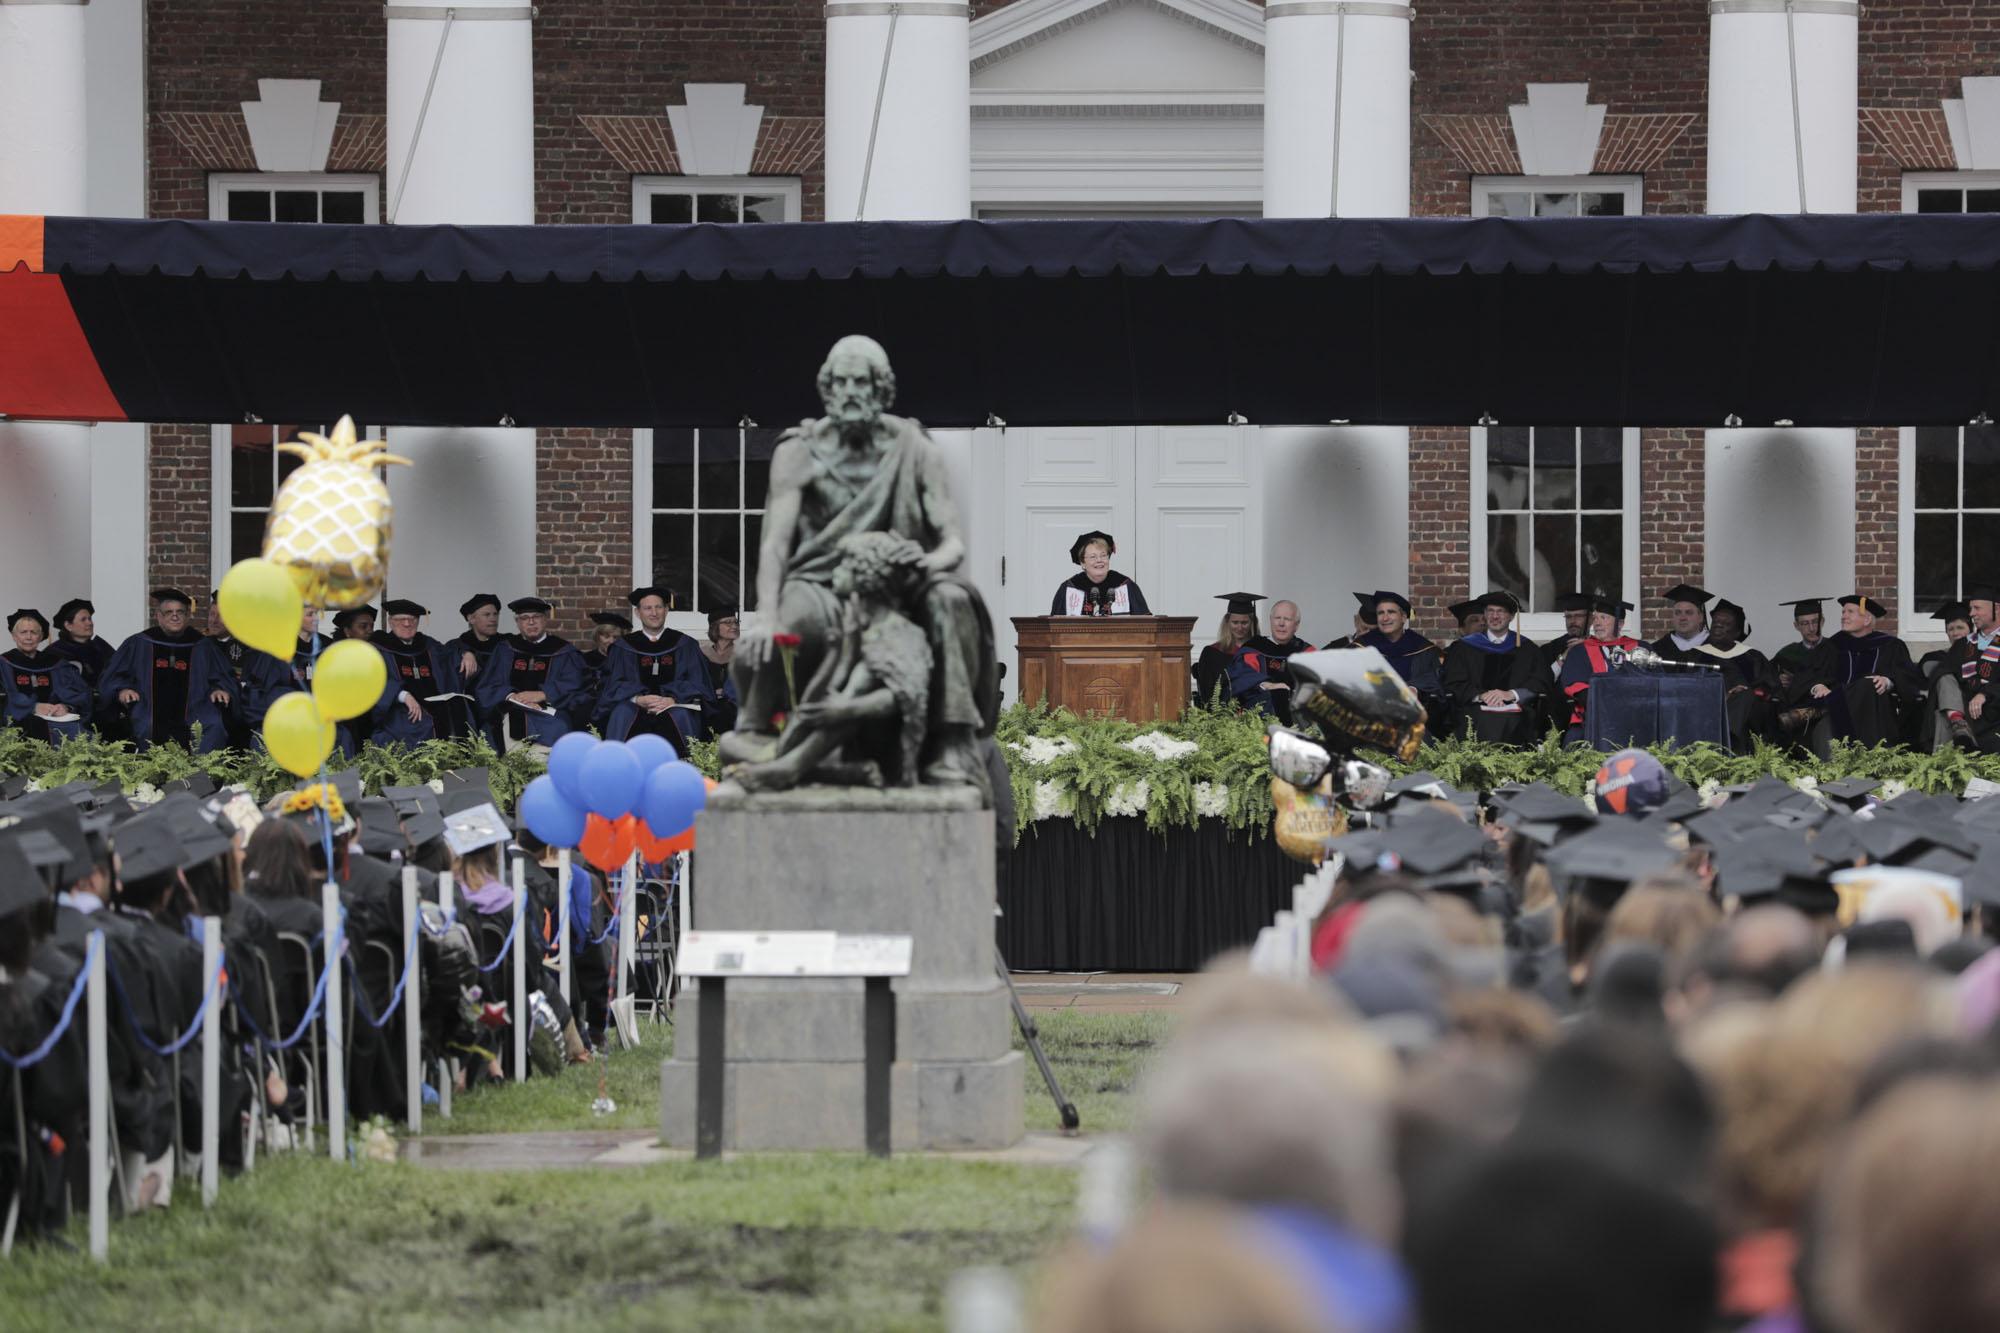 Despite Drizzle, Joy Abounds in the First Graduation Ceremony of the Weekend